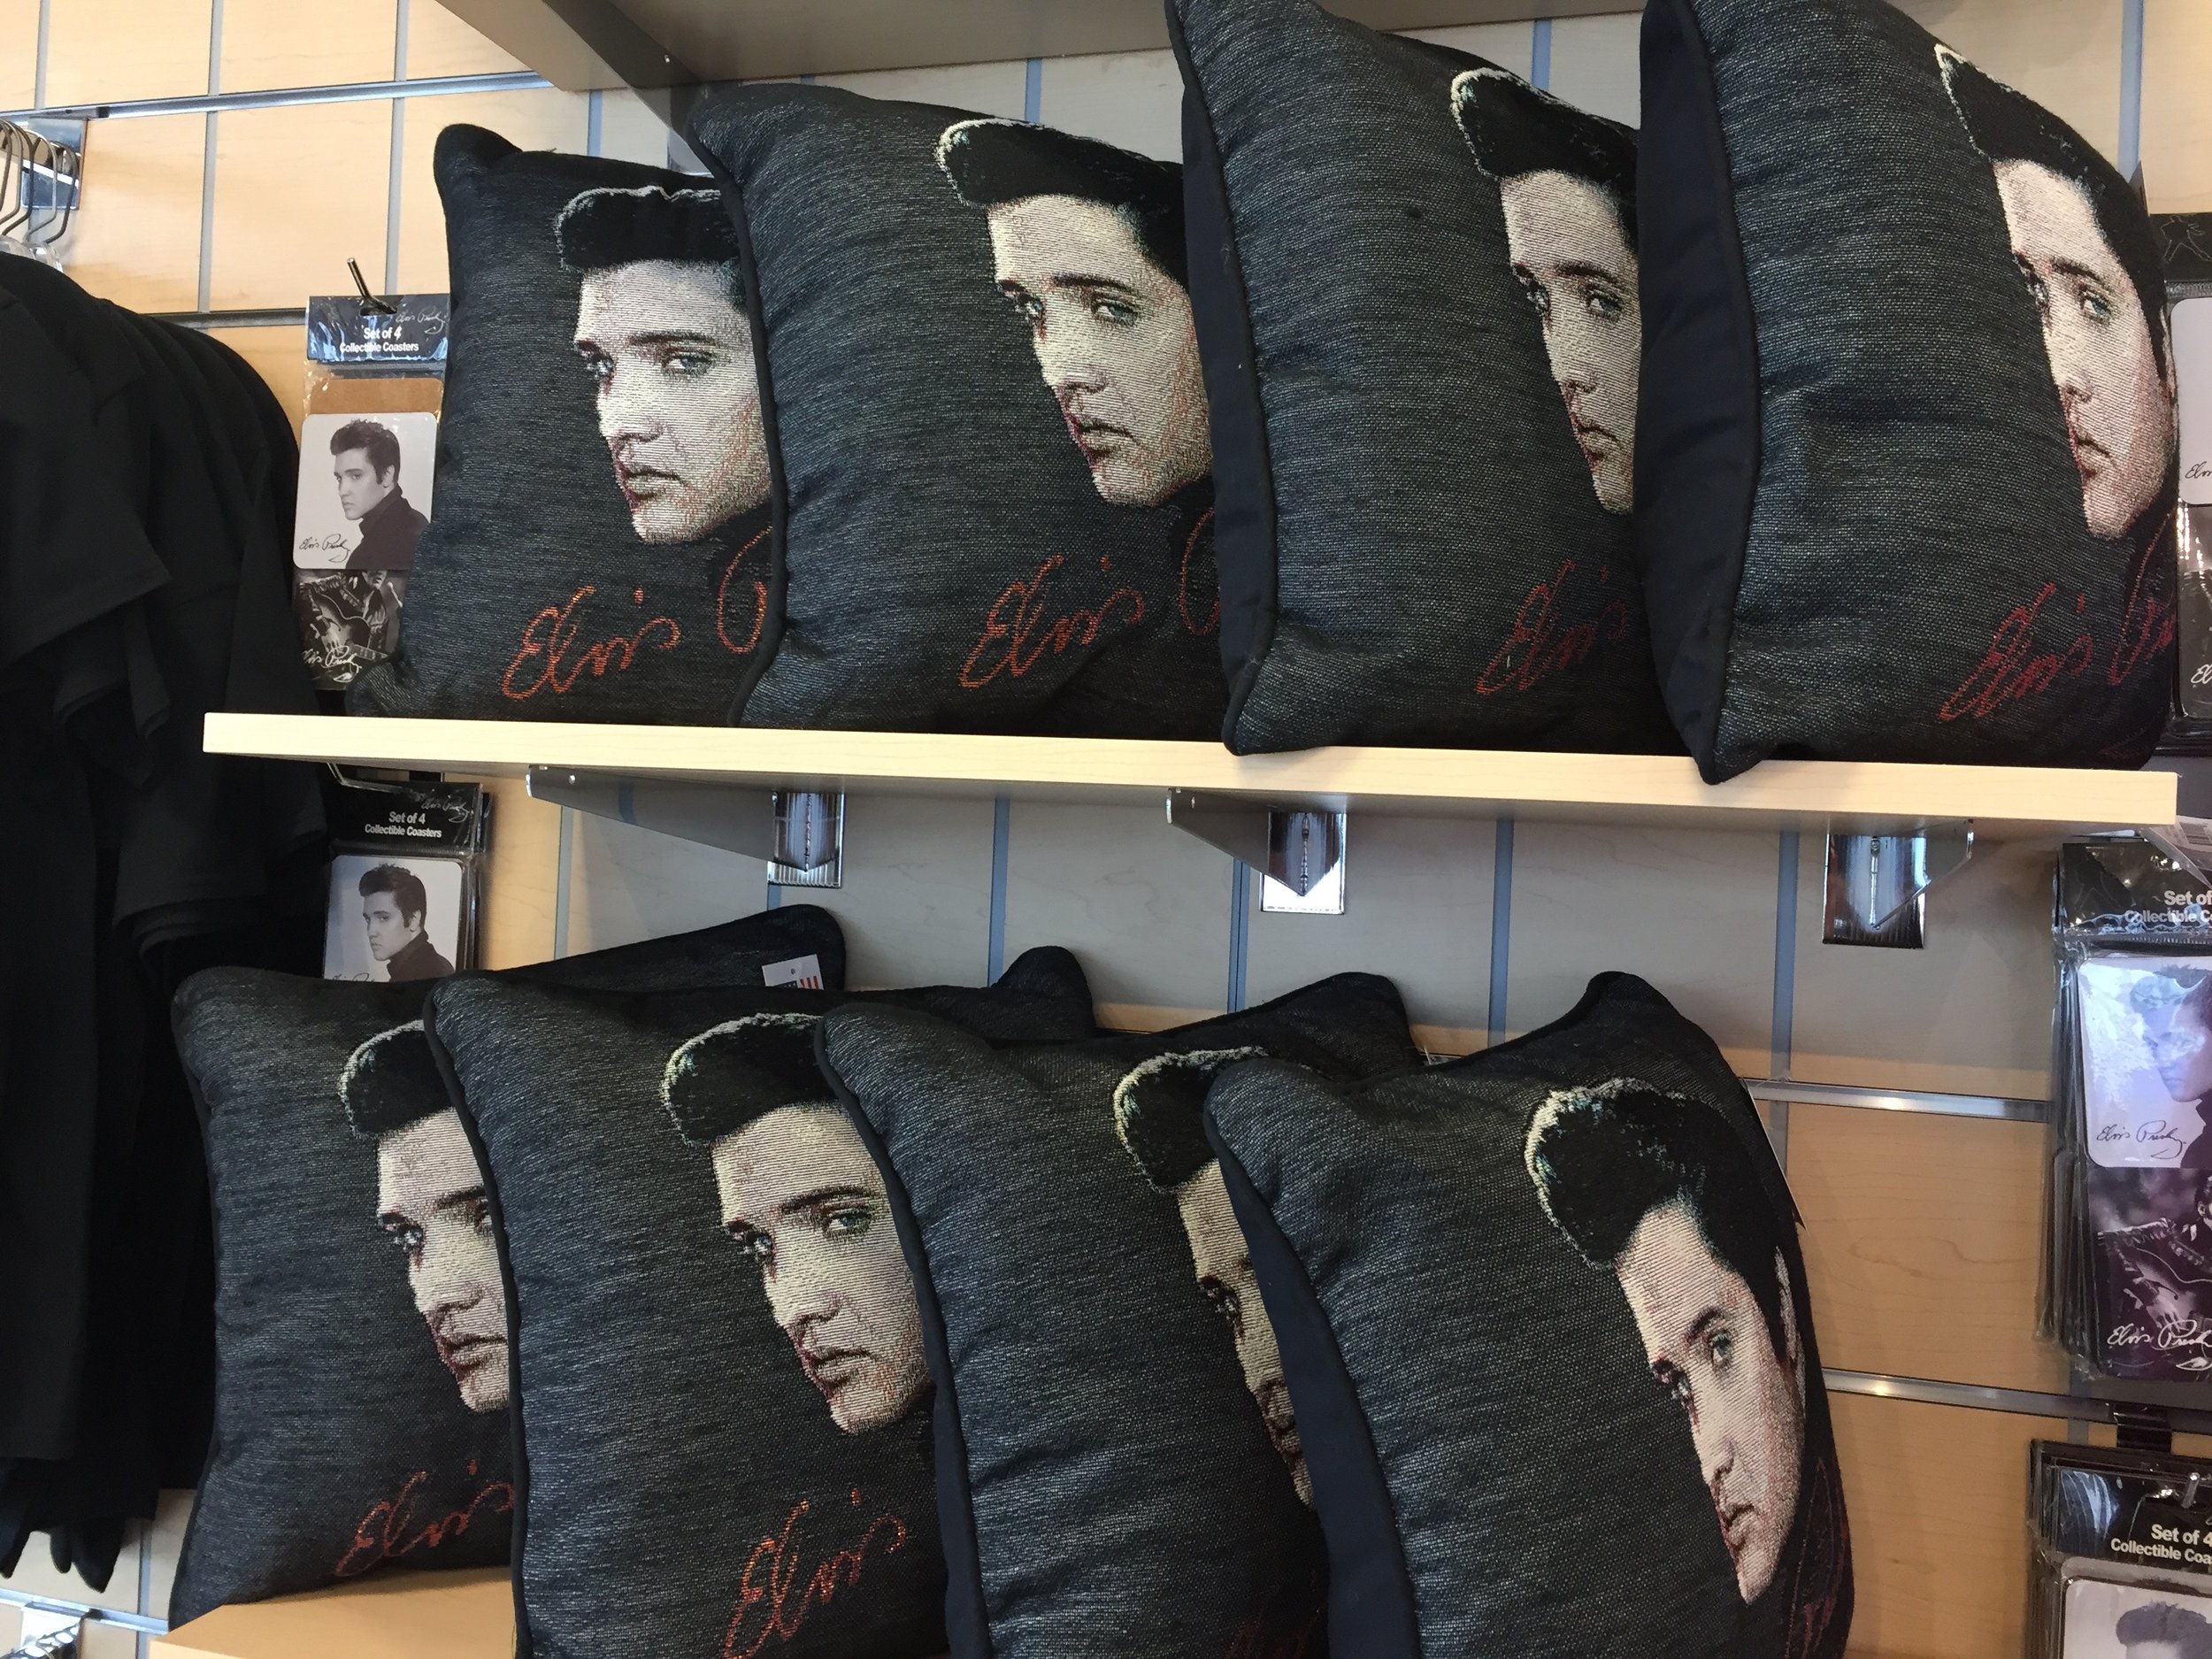  Souvenirs for sale at Graceland include all manner of images of Elvis, including these pillows.      